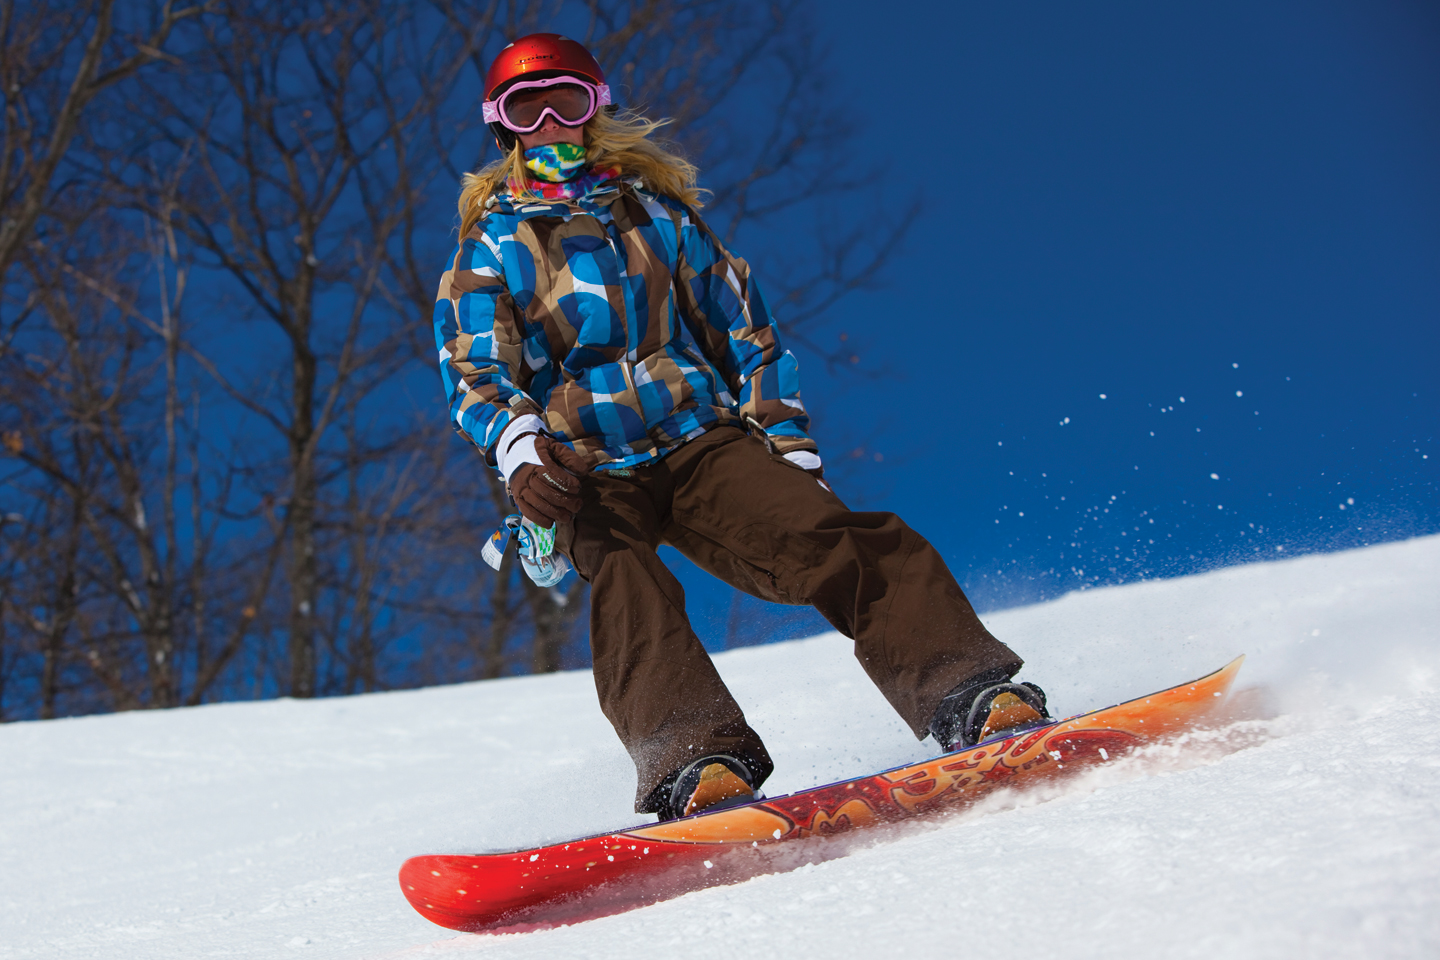 Female snowboarder in blue and brown